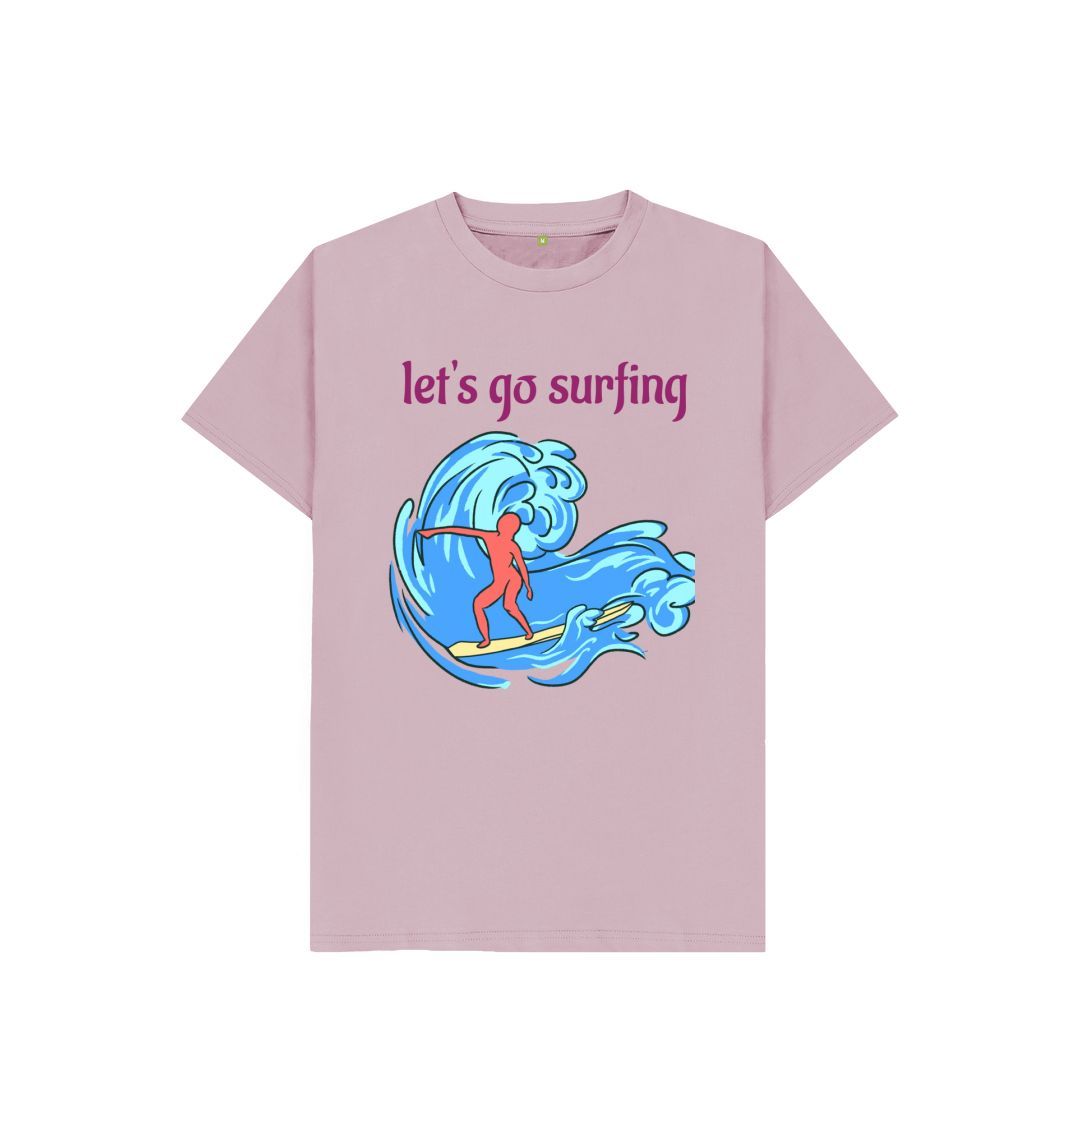 Mauve Kids' Sustainable T-Shirt - \"Let's Go Surfing: Ride the Waves Sustainably